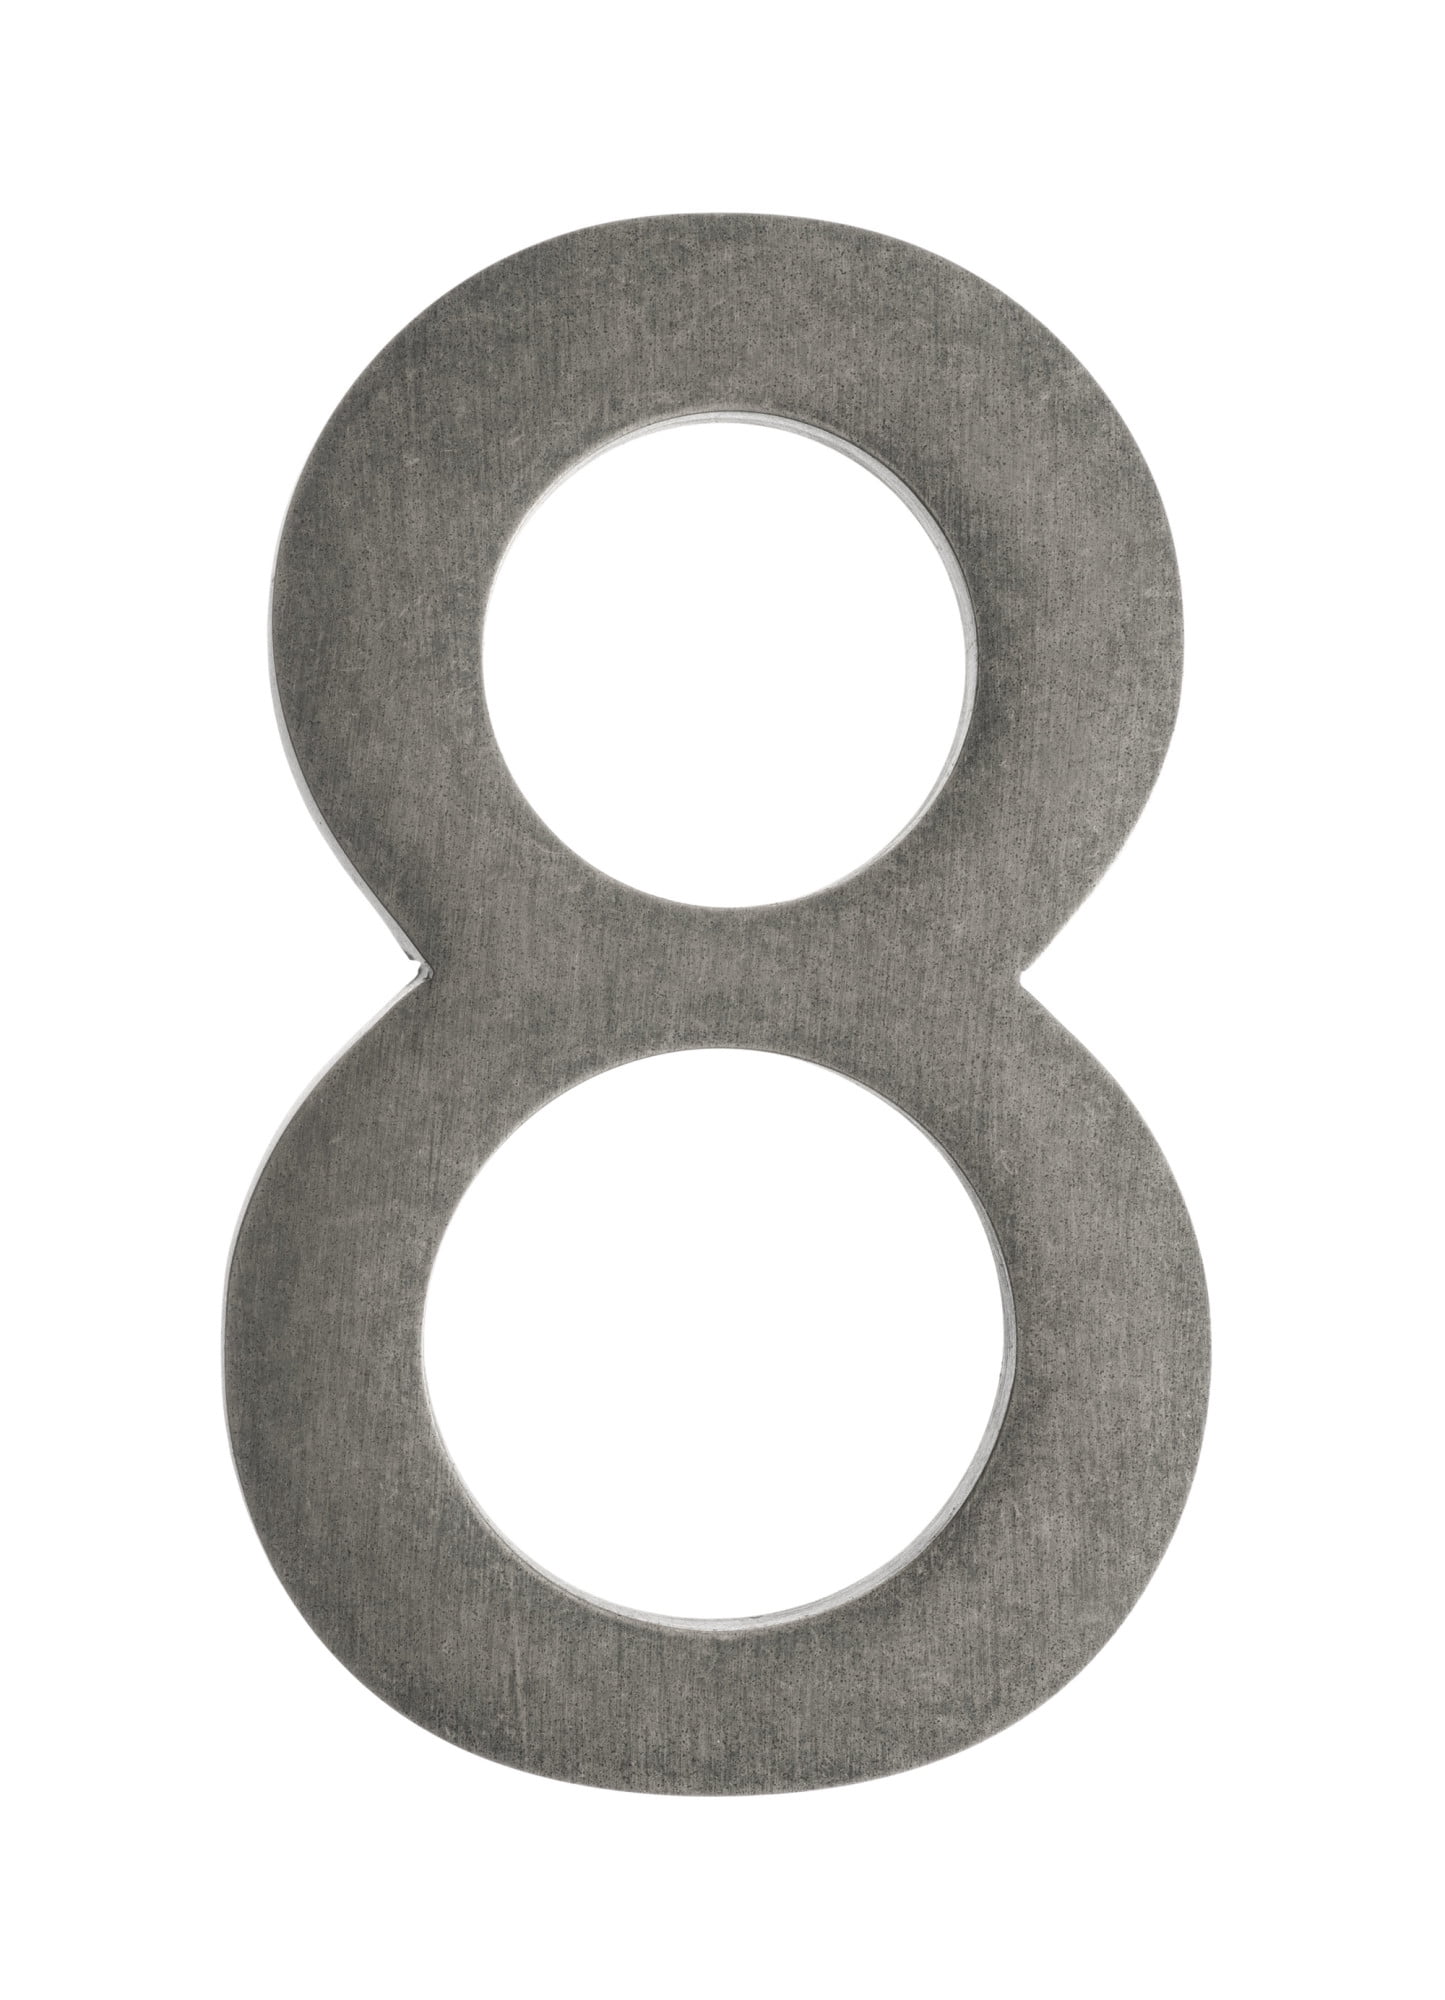 3582apa-8 Floating House Number 8, Antique Pewter - 4 In.